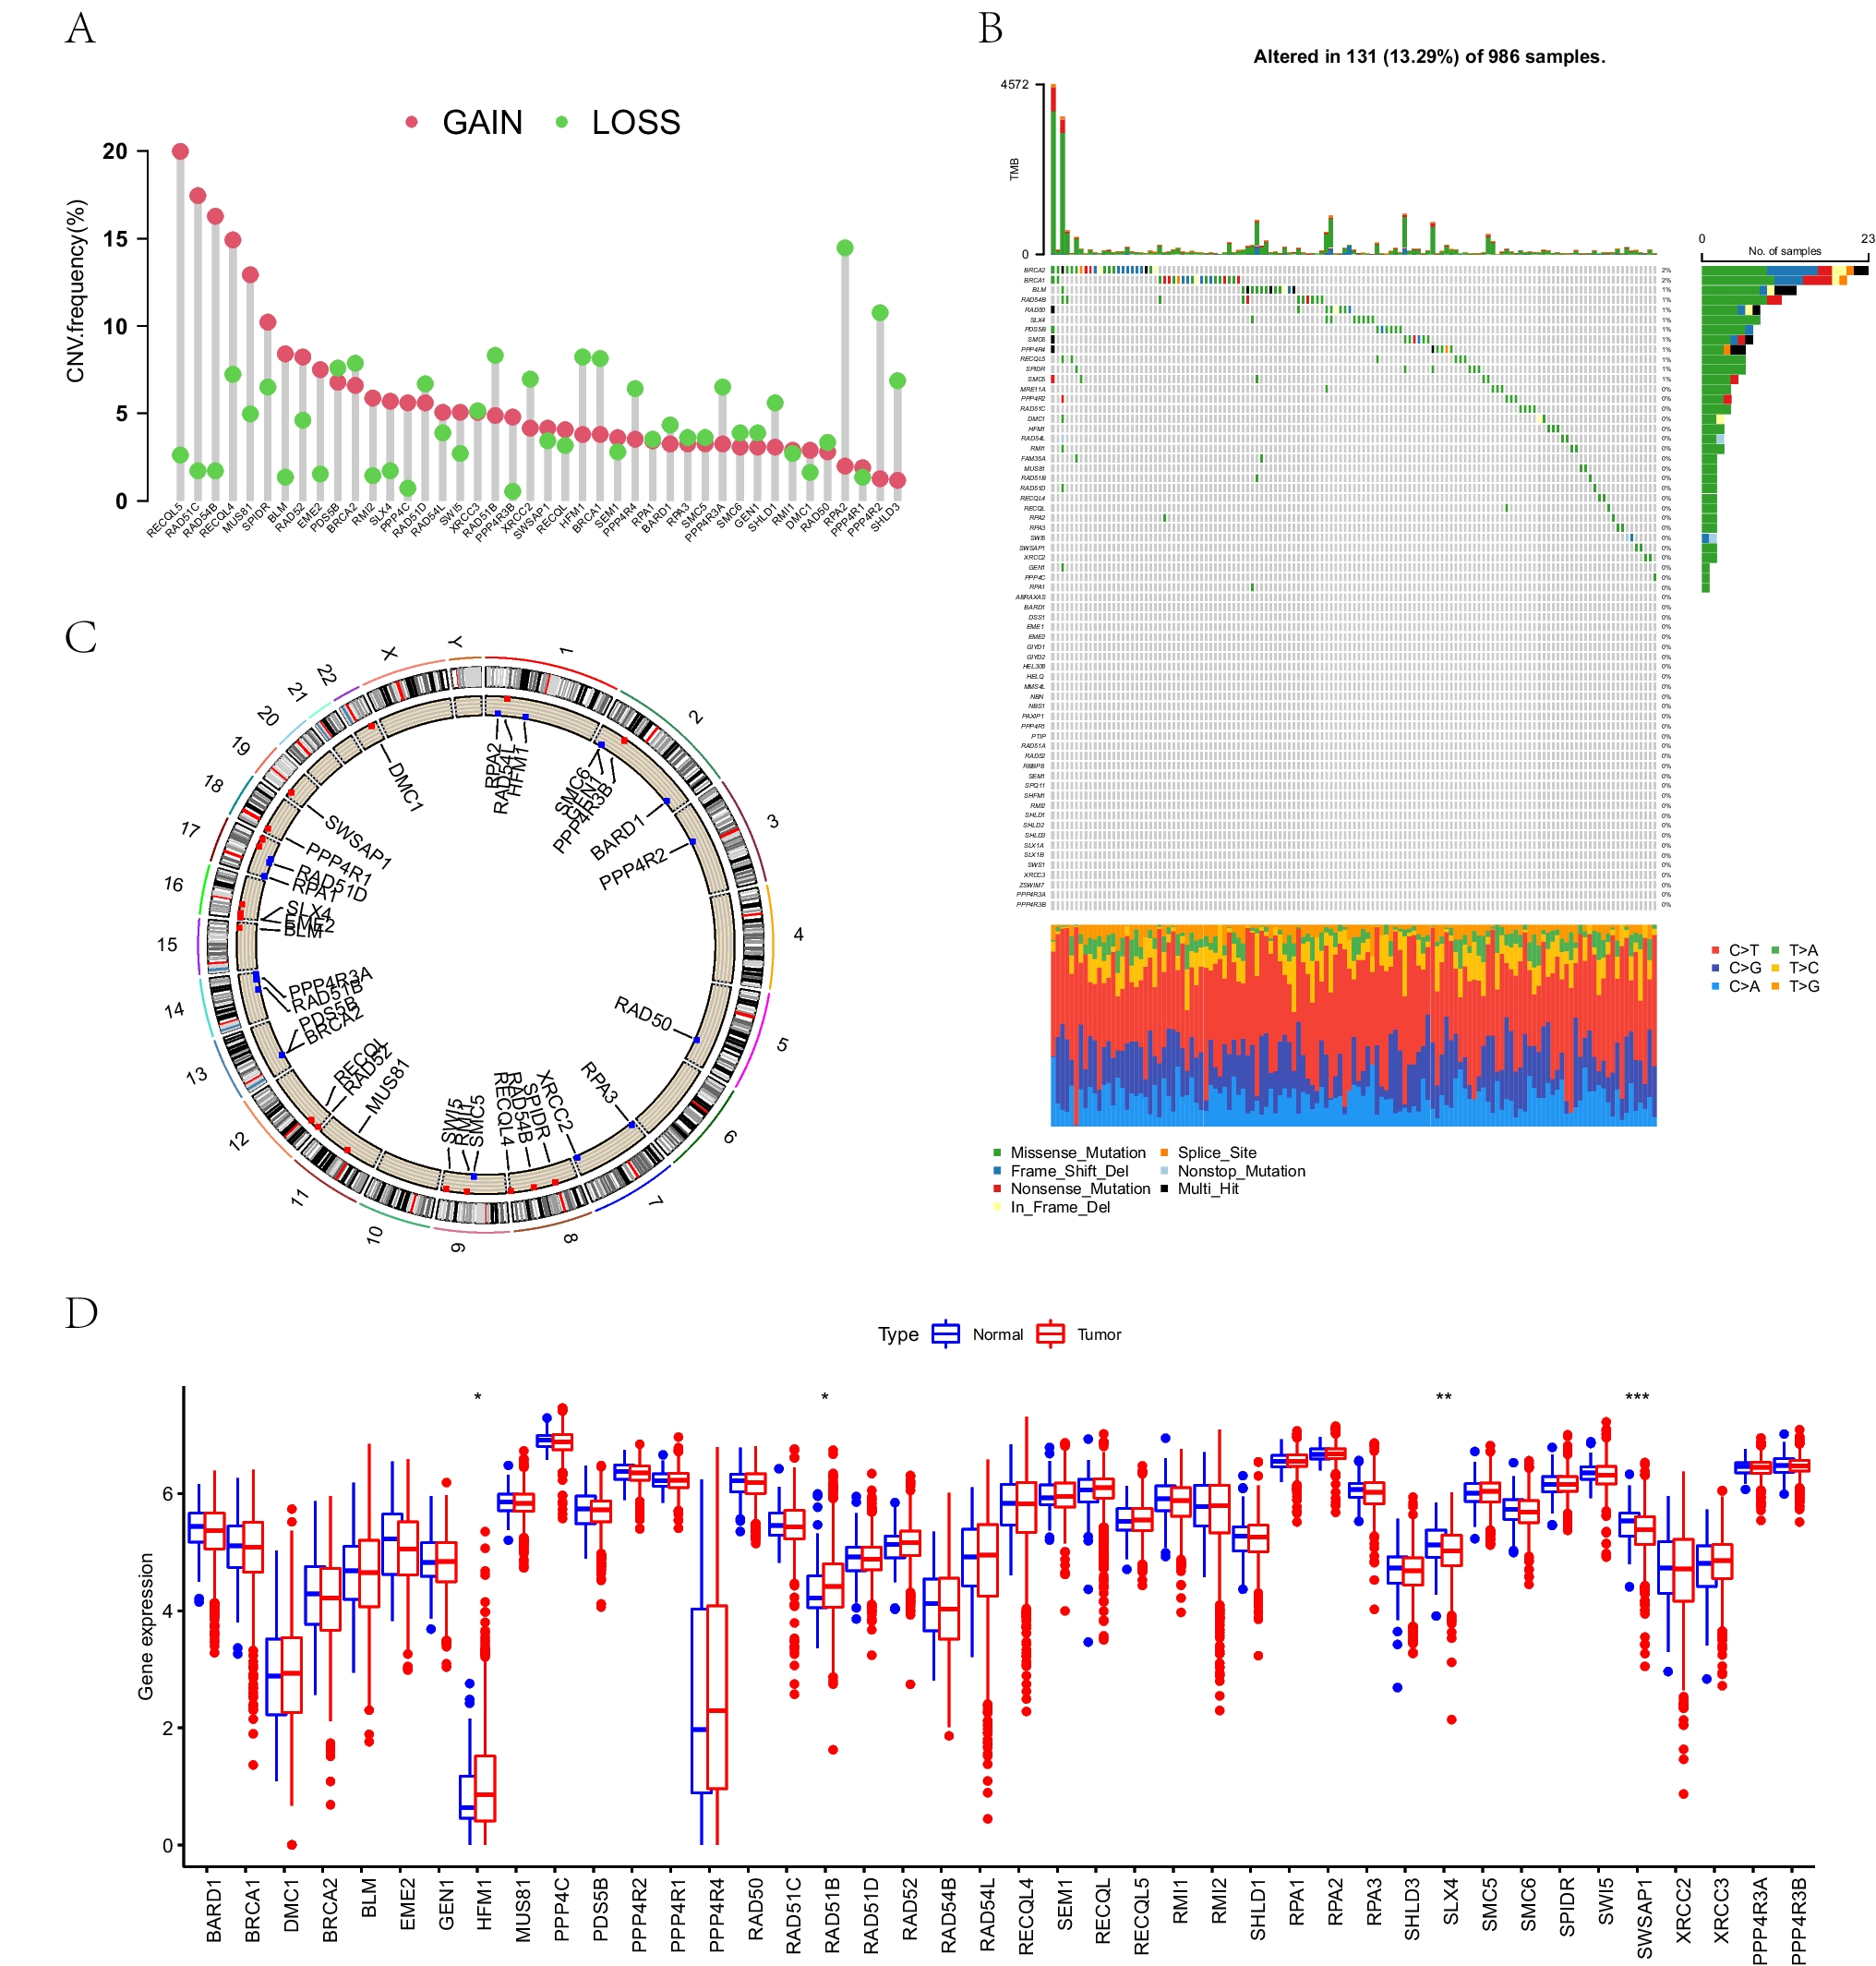 Integrative analysis of homologous recombination repair patterns unveils prognostic signatures and immunotherapeutic insights in breast cancer